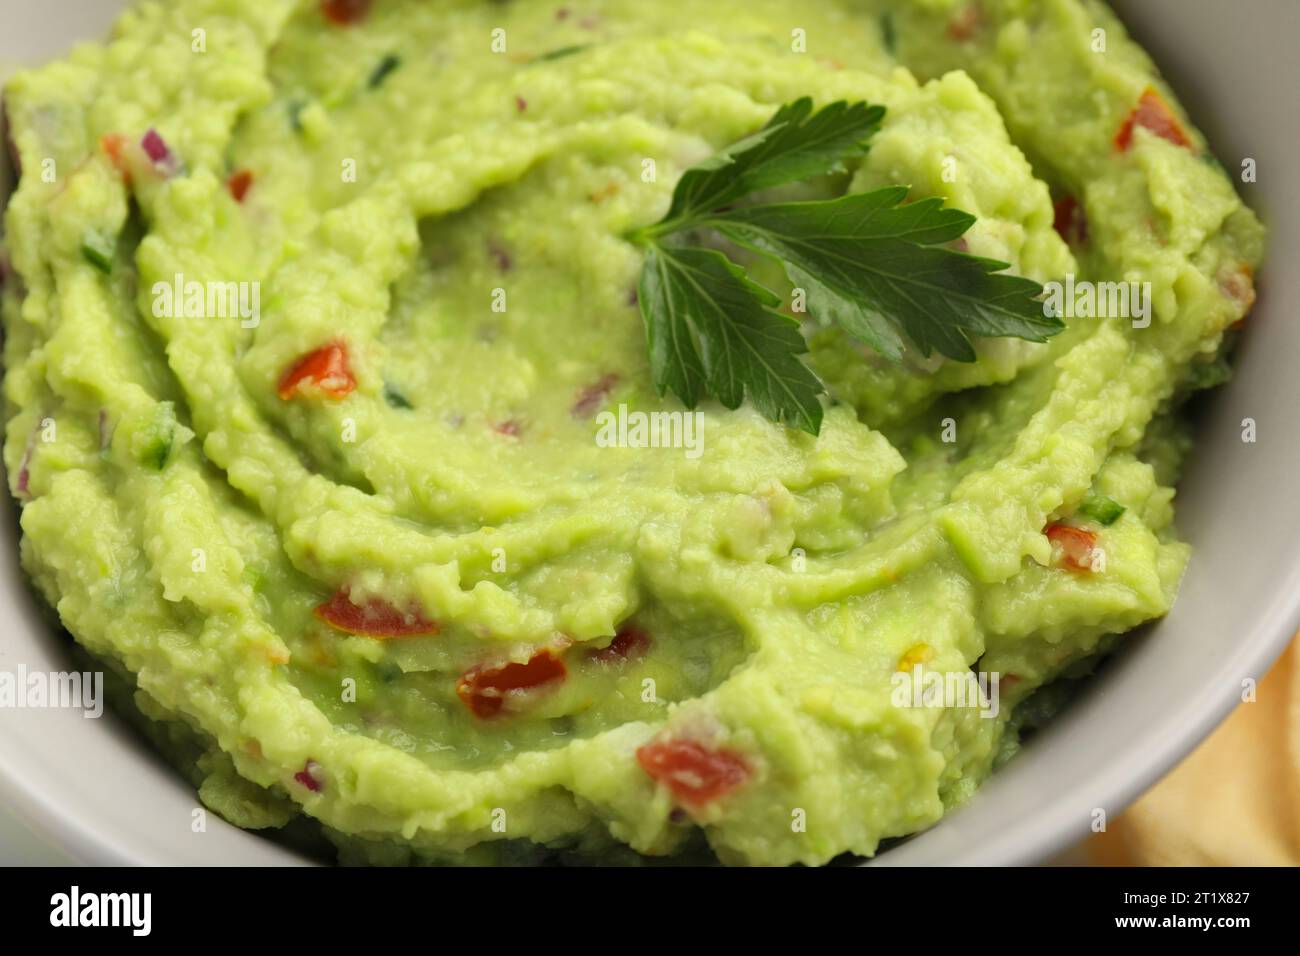 Bowl of delicious guacamole with parsley, closeup Stock Photo